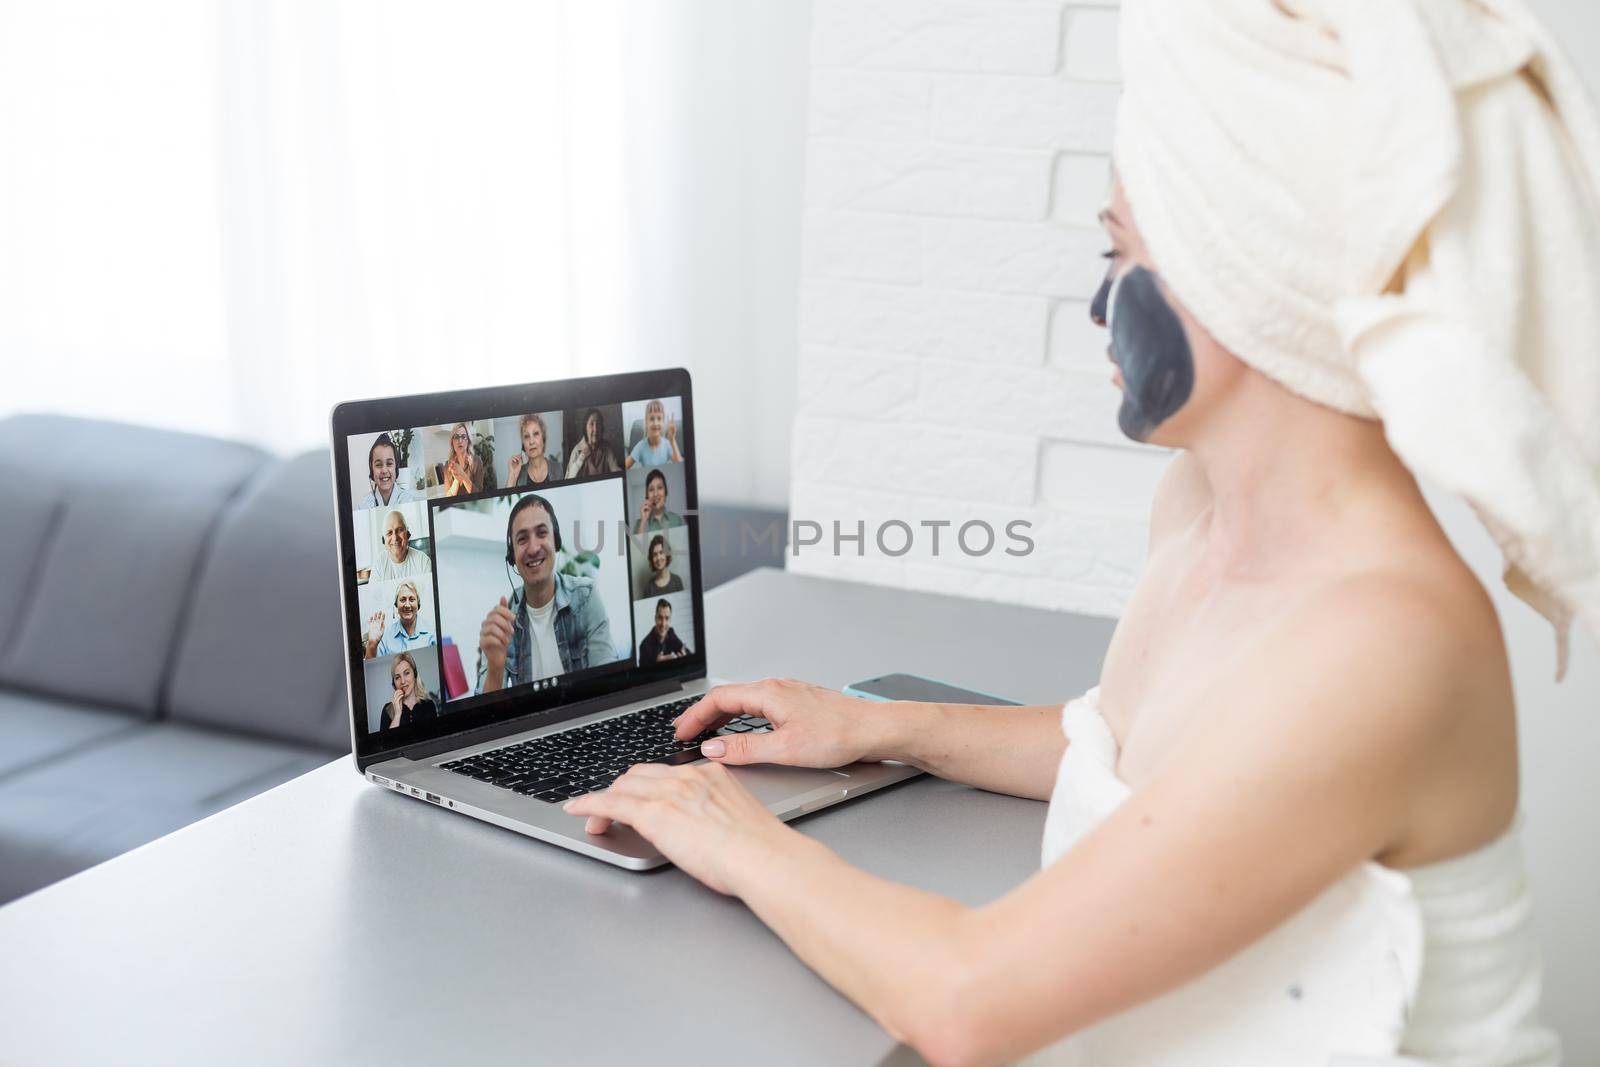 incredible pretty girl at home in pajamas made a cosmetic mask and works with a laptop. The concept of cosmetic mask on a girl